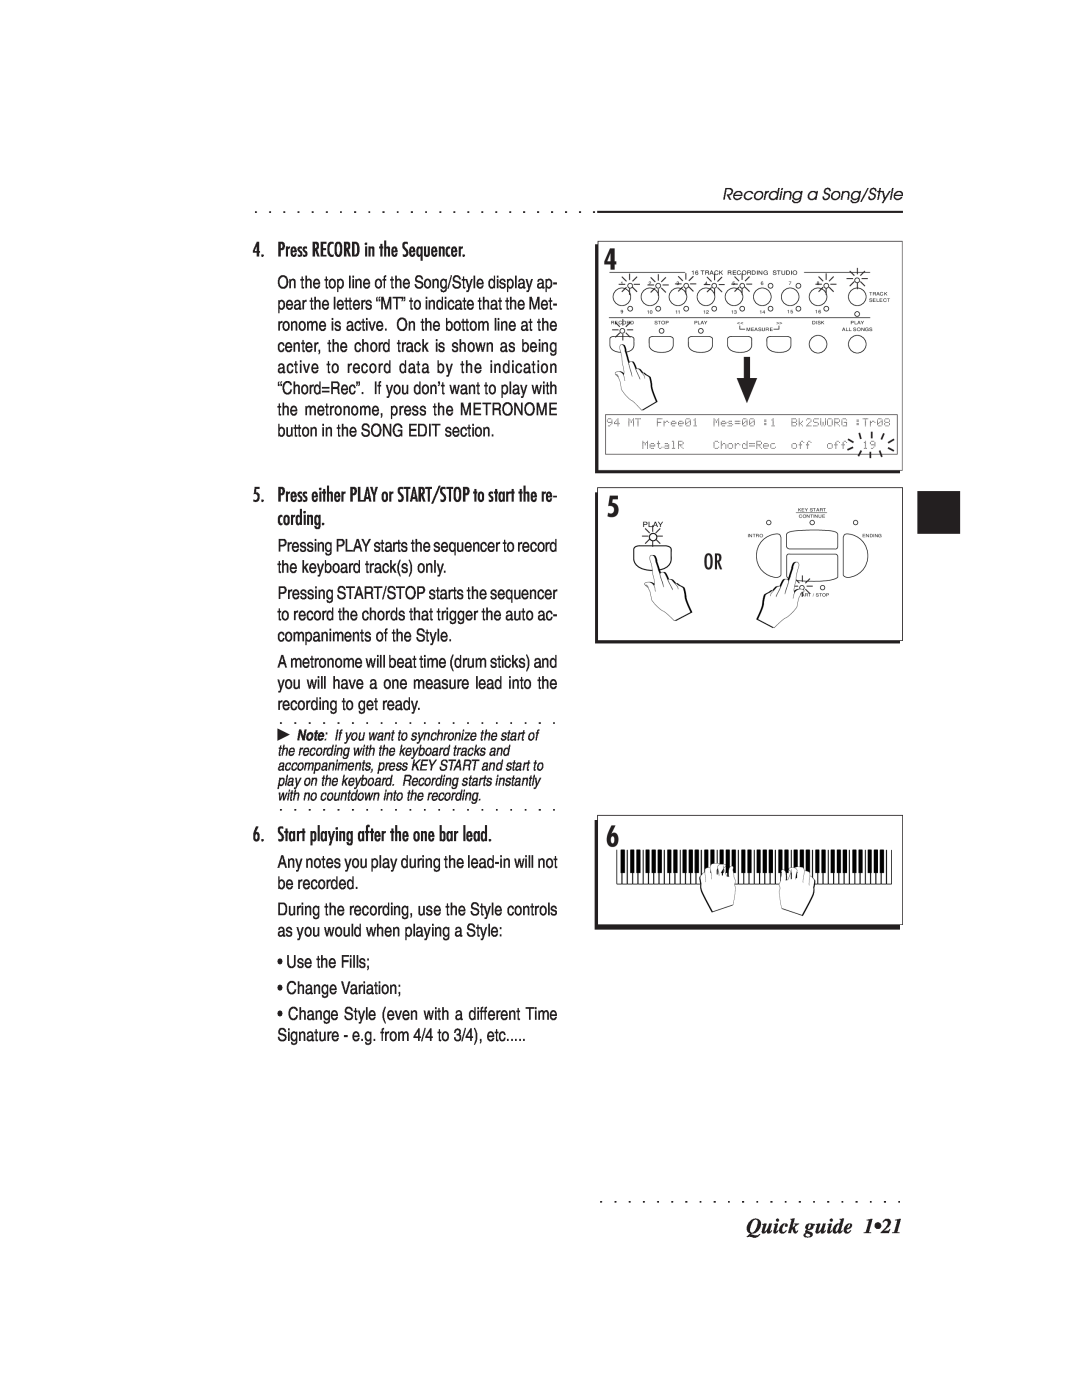 IBM PS1500 owner manual Quick guide, Press RECORD in the Sequencer, Start playing after the one bar lead 